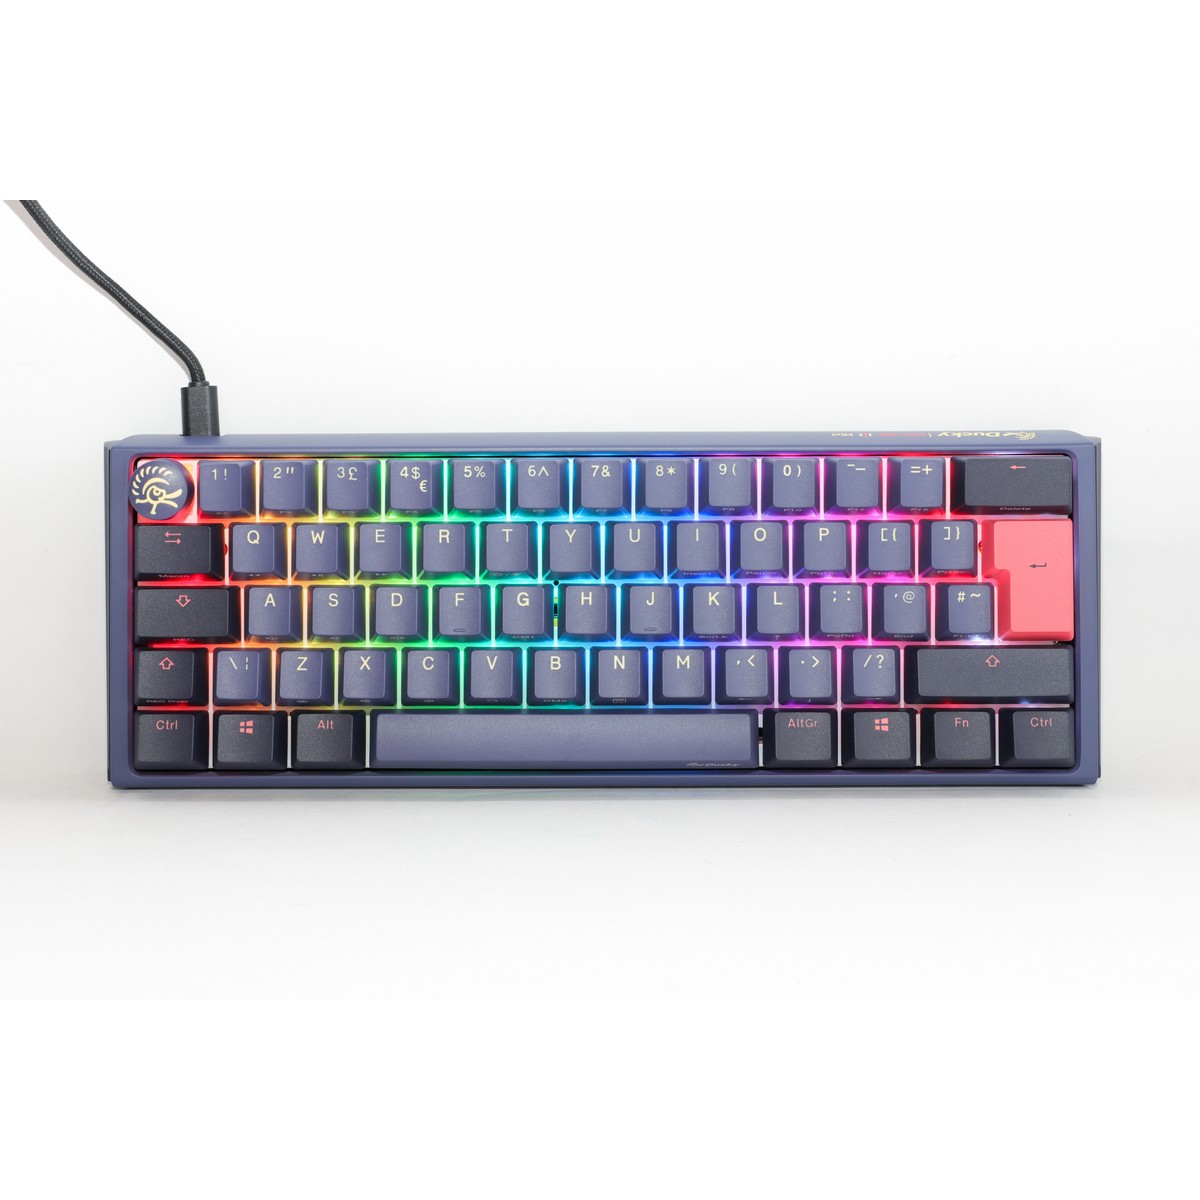 Ducky One 3 Cosmic Mini 60% USB RGB Mechanical Gaming Keyboard Cherry MX Silent Red Switch - UK Layout